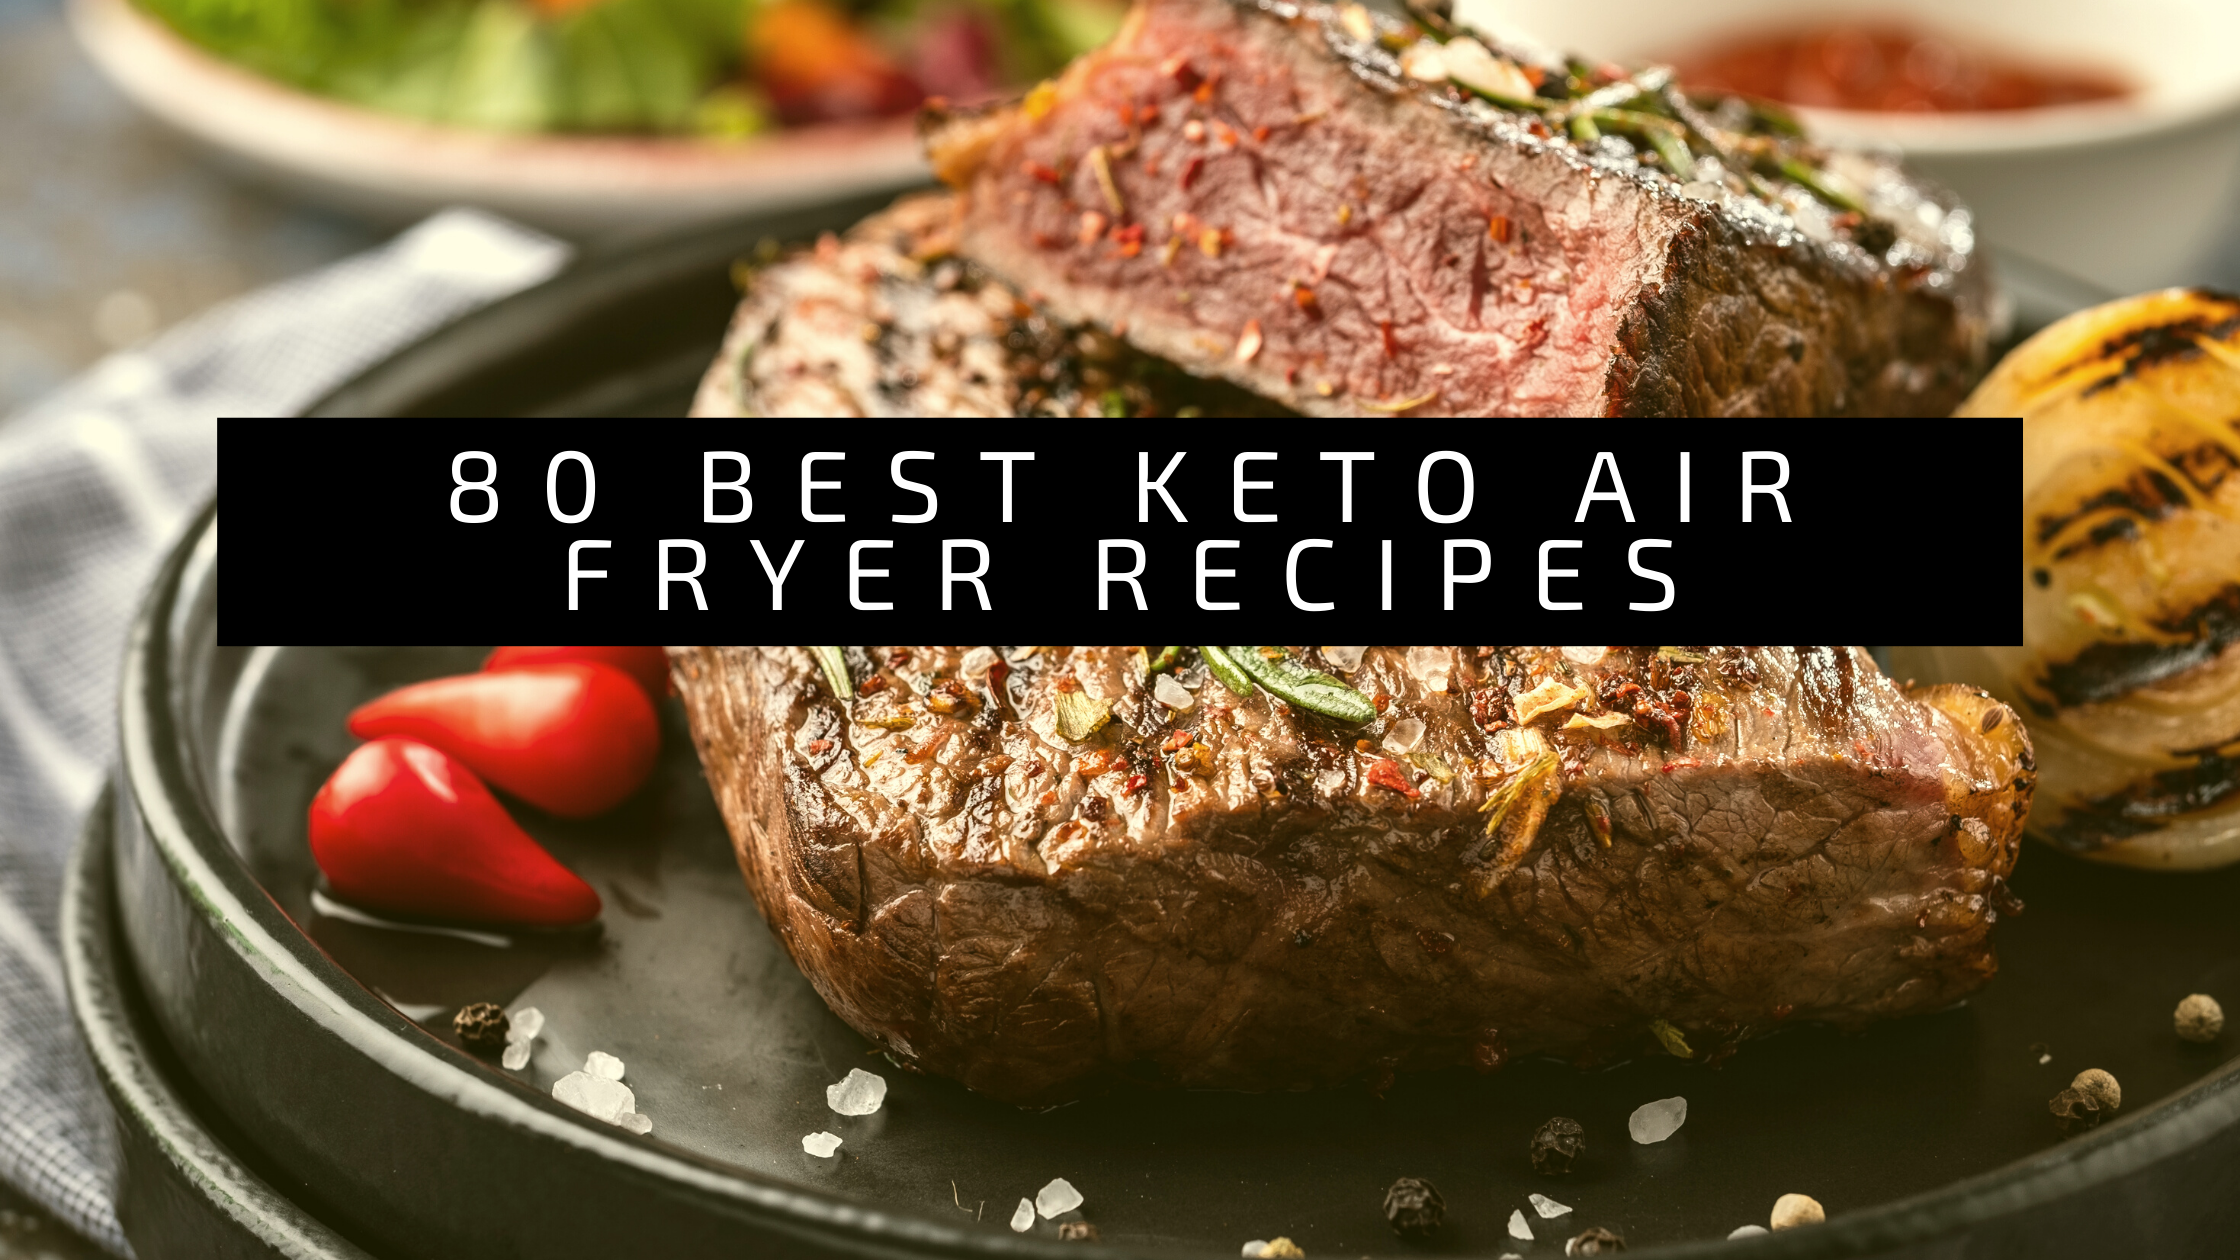 40 Family-Friendly Keto Air Fryer Recipes for Quick and Delicious Meals 41